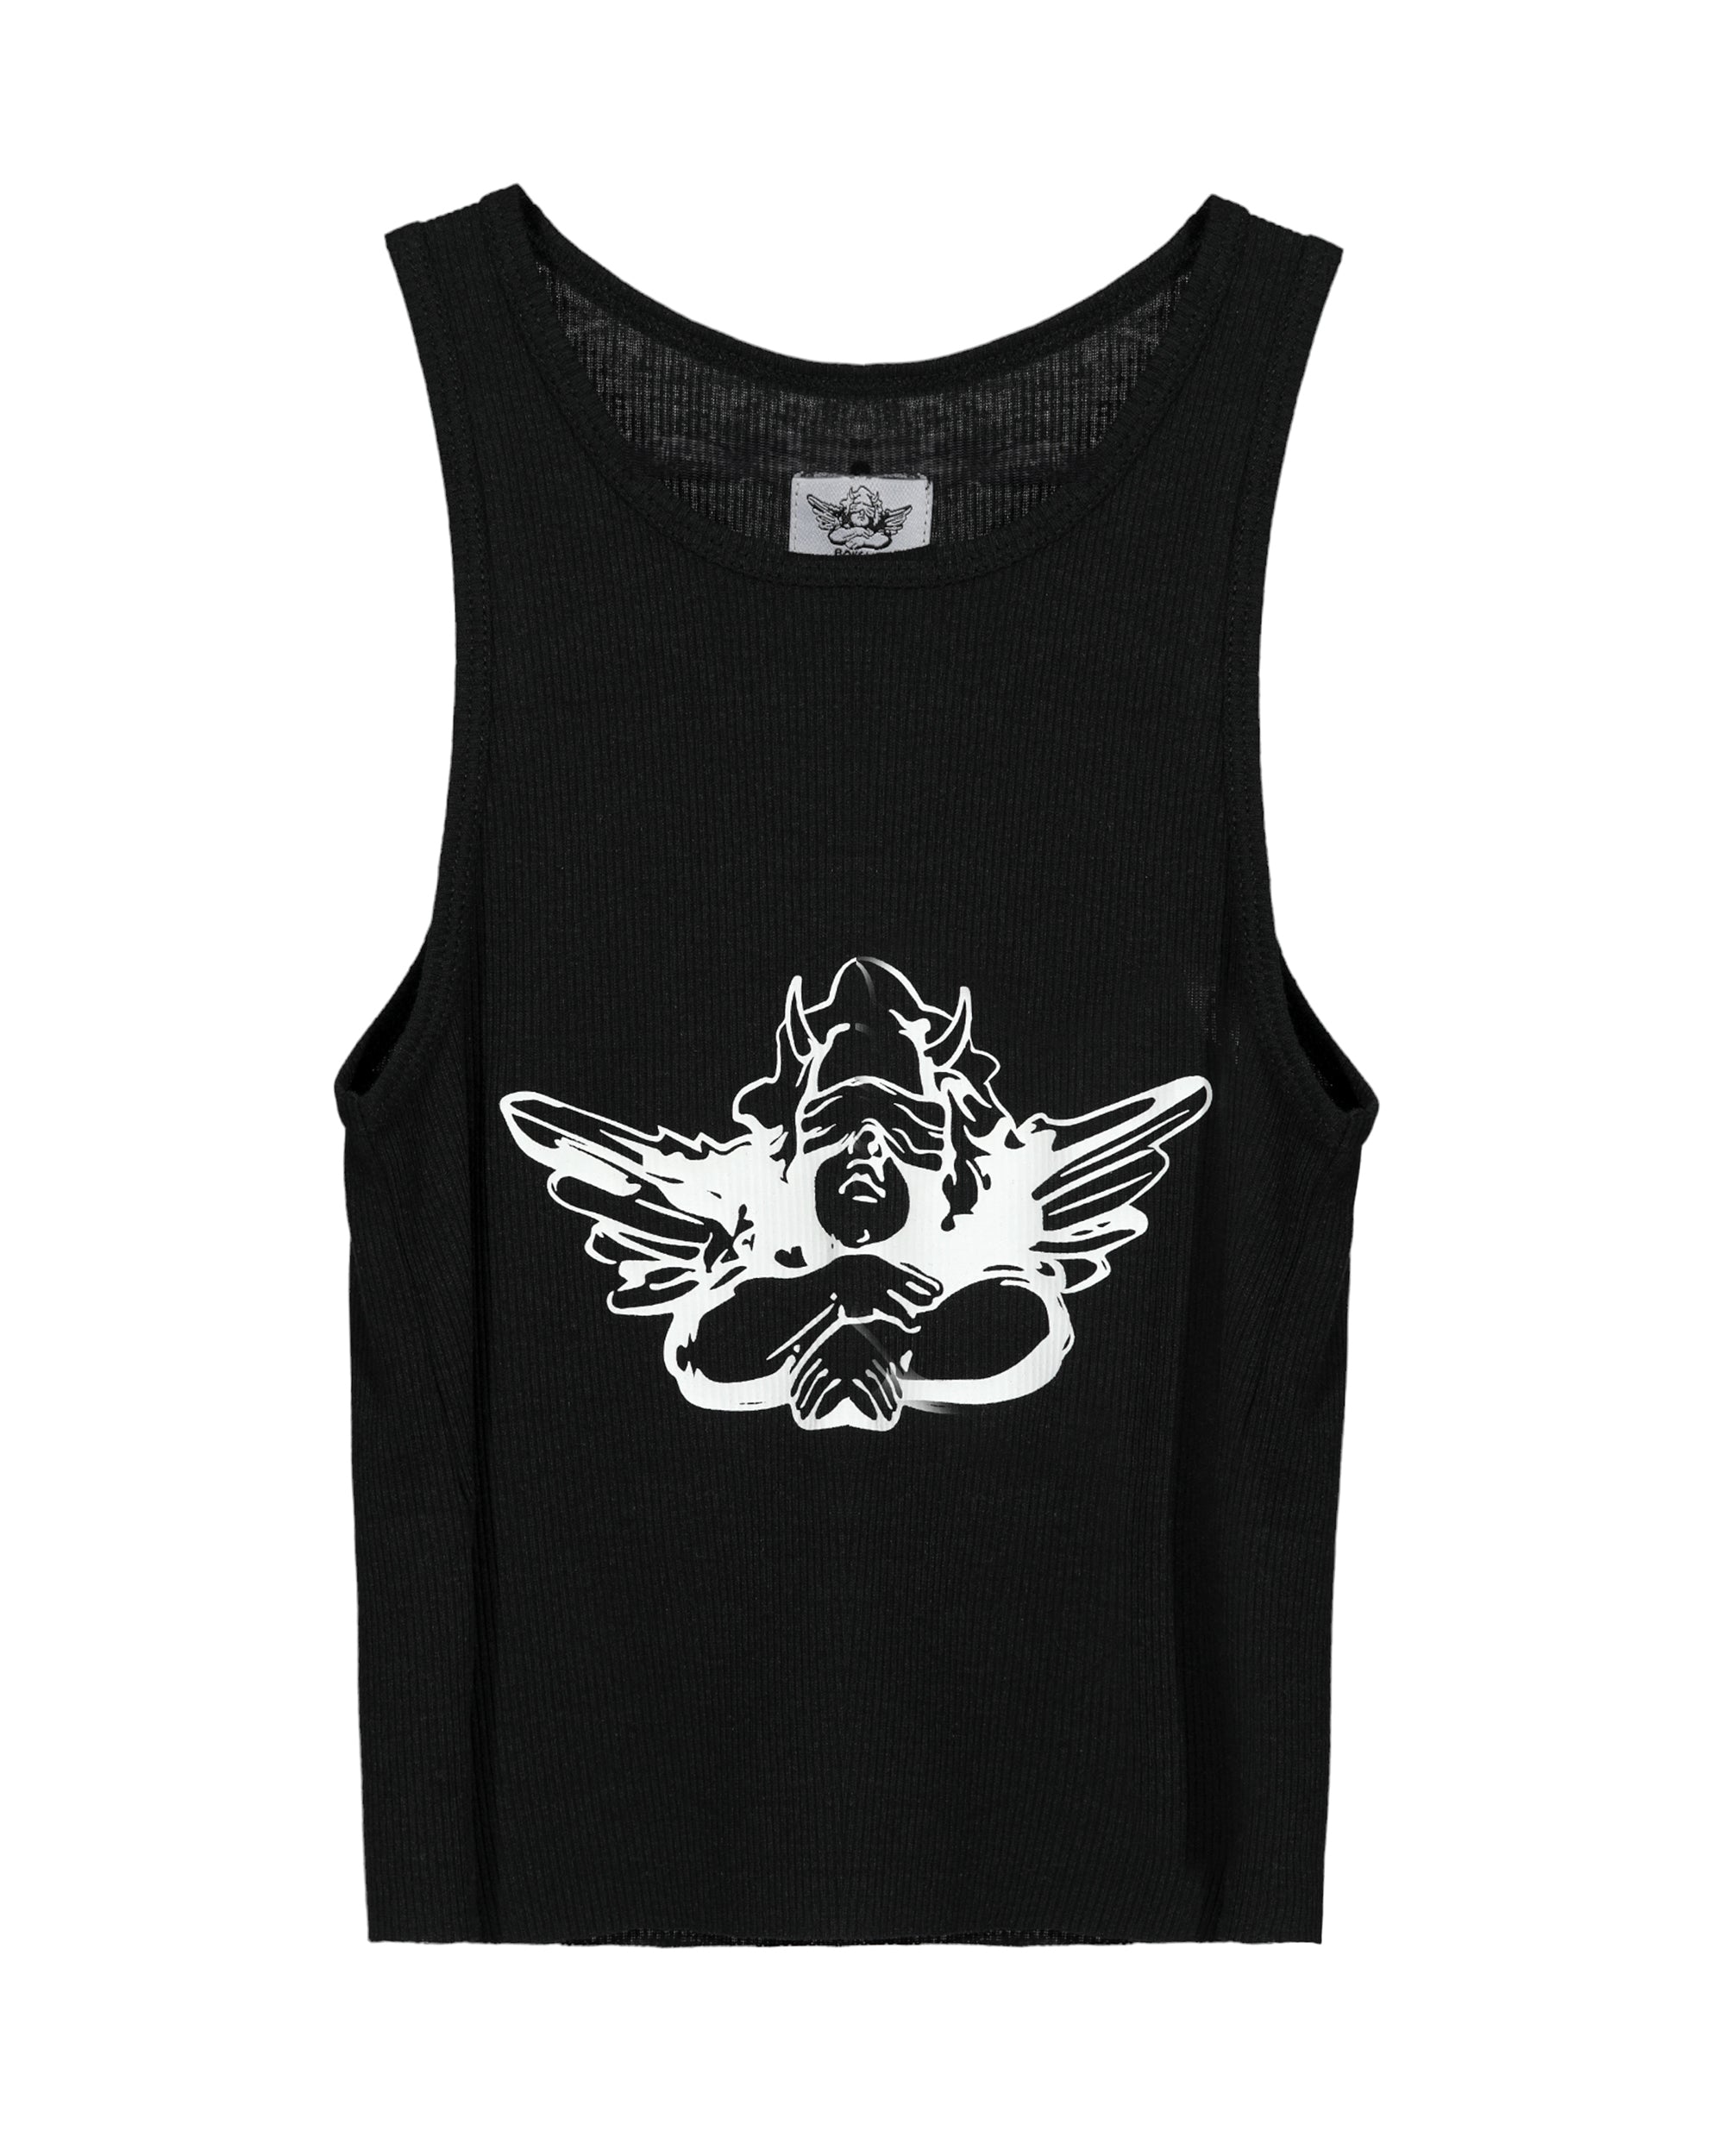 Black Sour Patch Beegee Tank